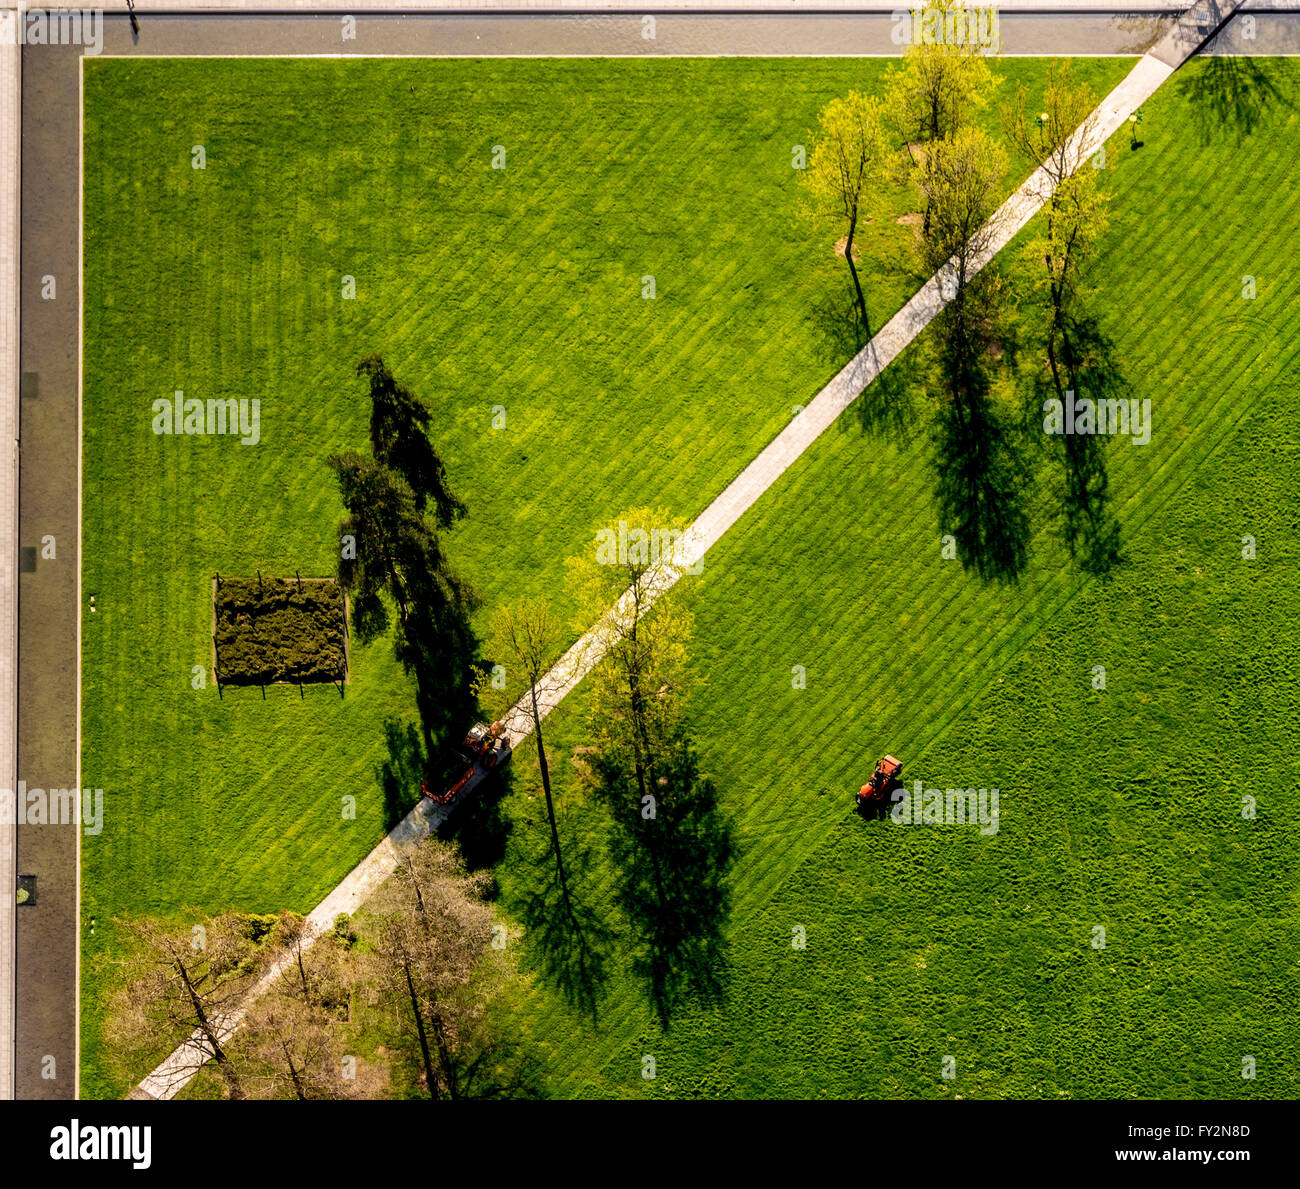 Grass cutting seen from above in Parc André Citroën, Paris, France. Stock Photo